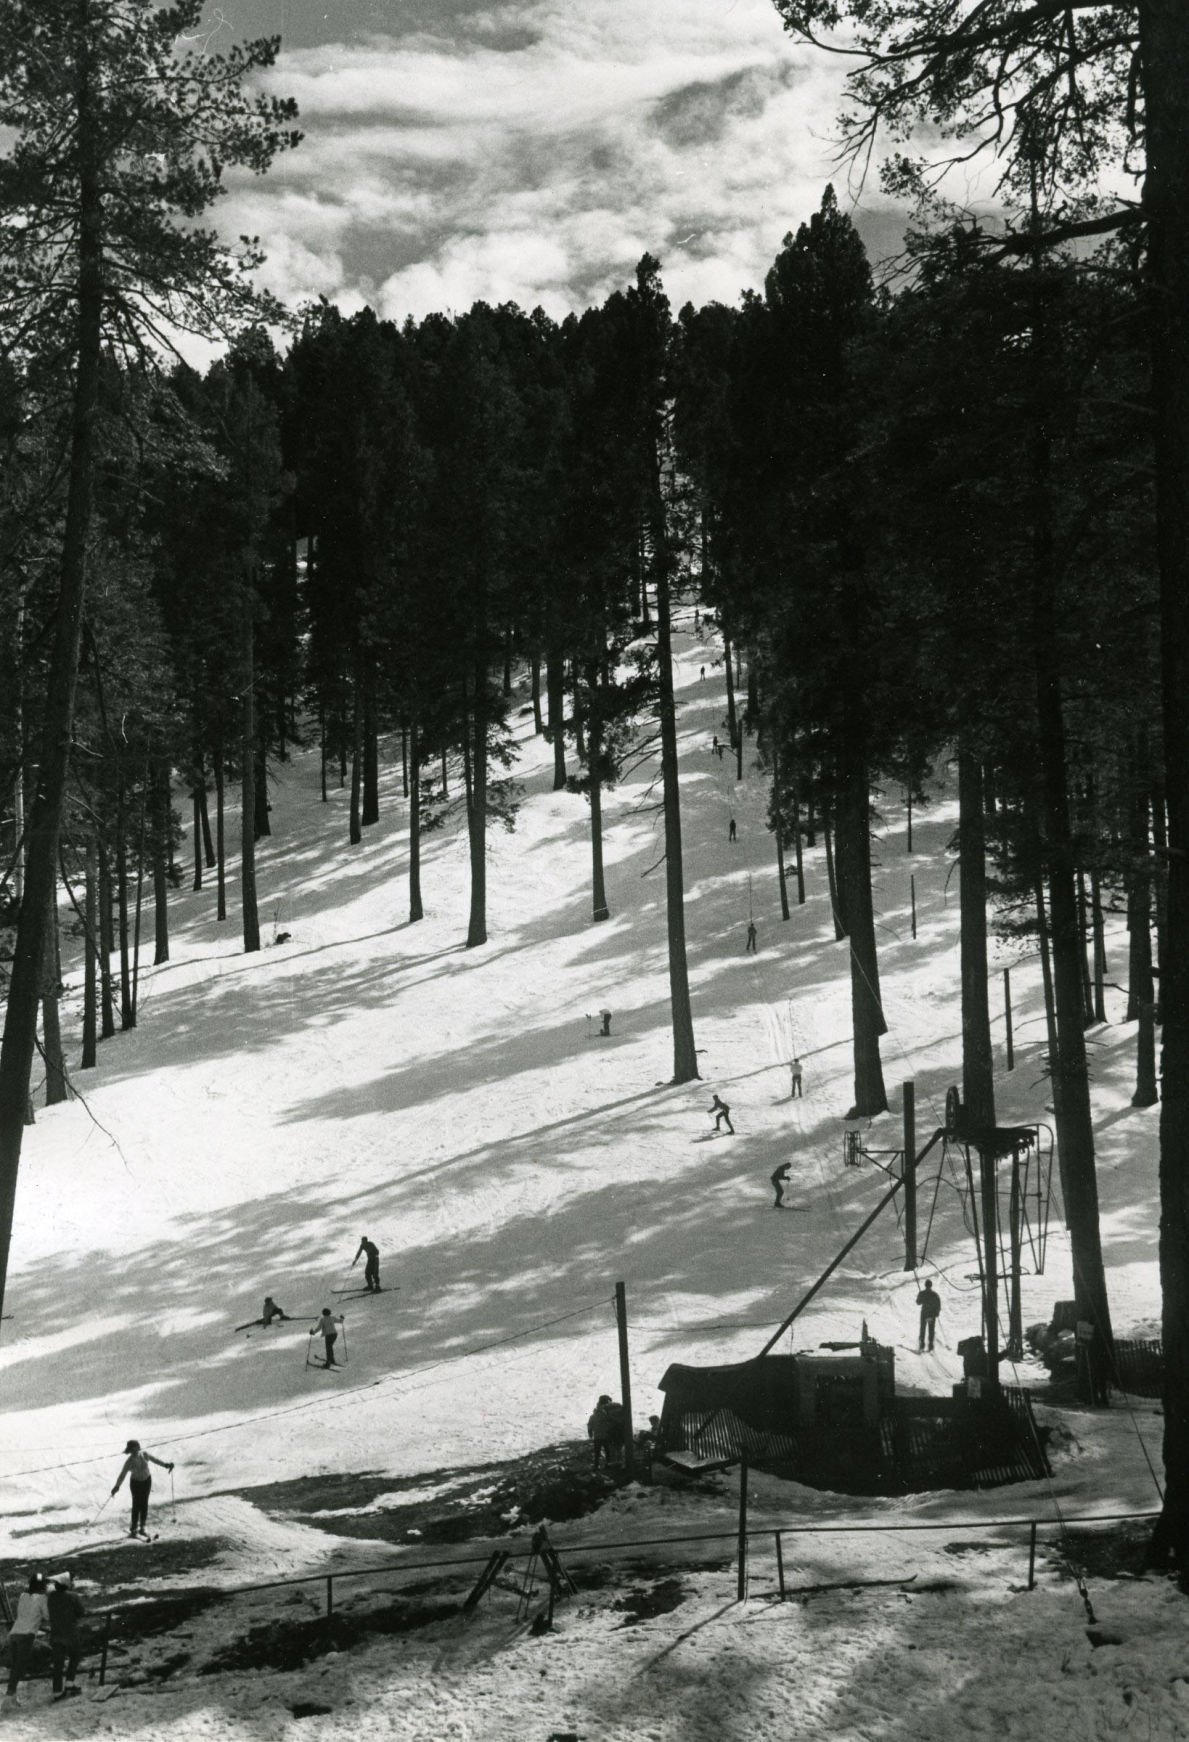 Beautiful Mount Lemmon snow photos from the past | Hiking and ...